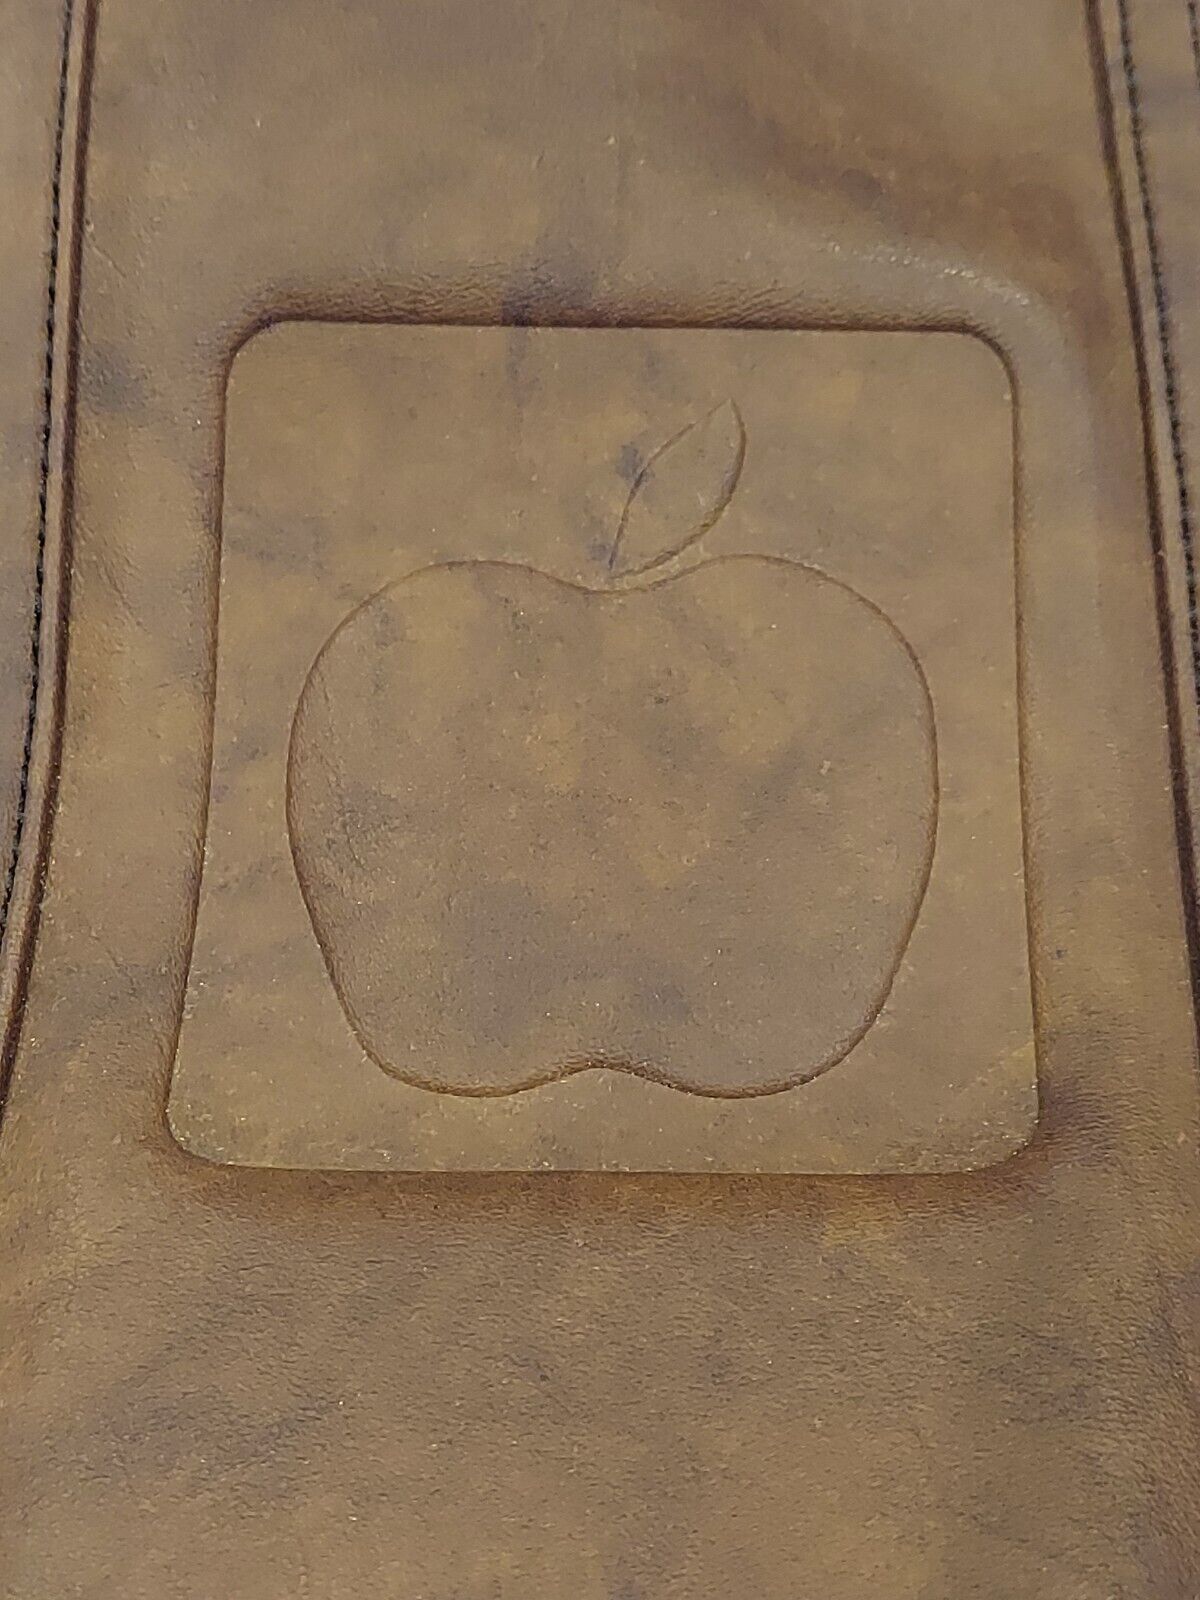 VINTAGE RARE Macintosh Apple II 1977 Computer Carrying Bag Leather Brown Case 